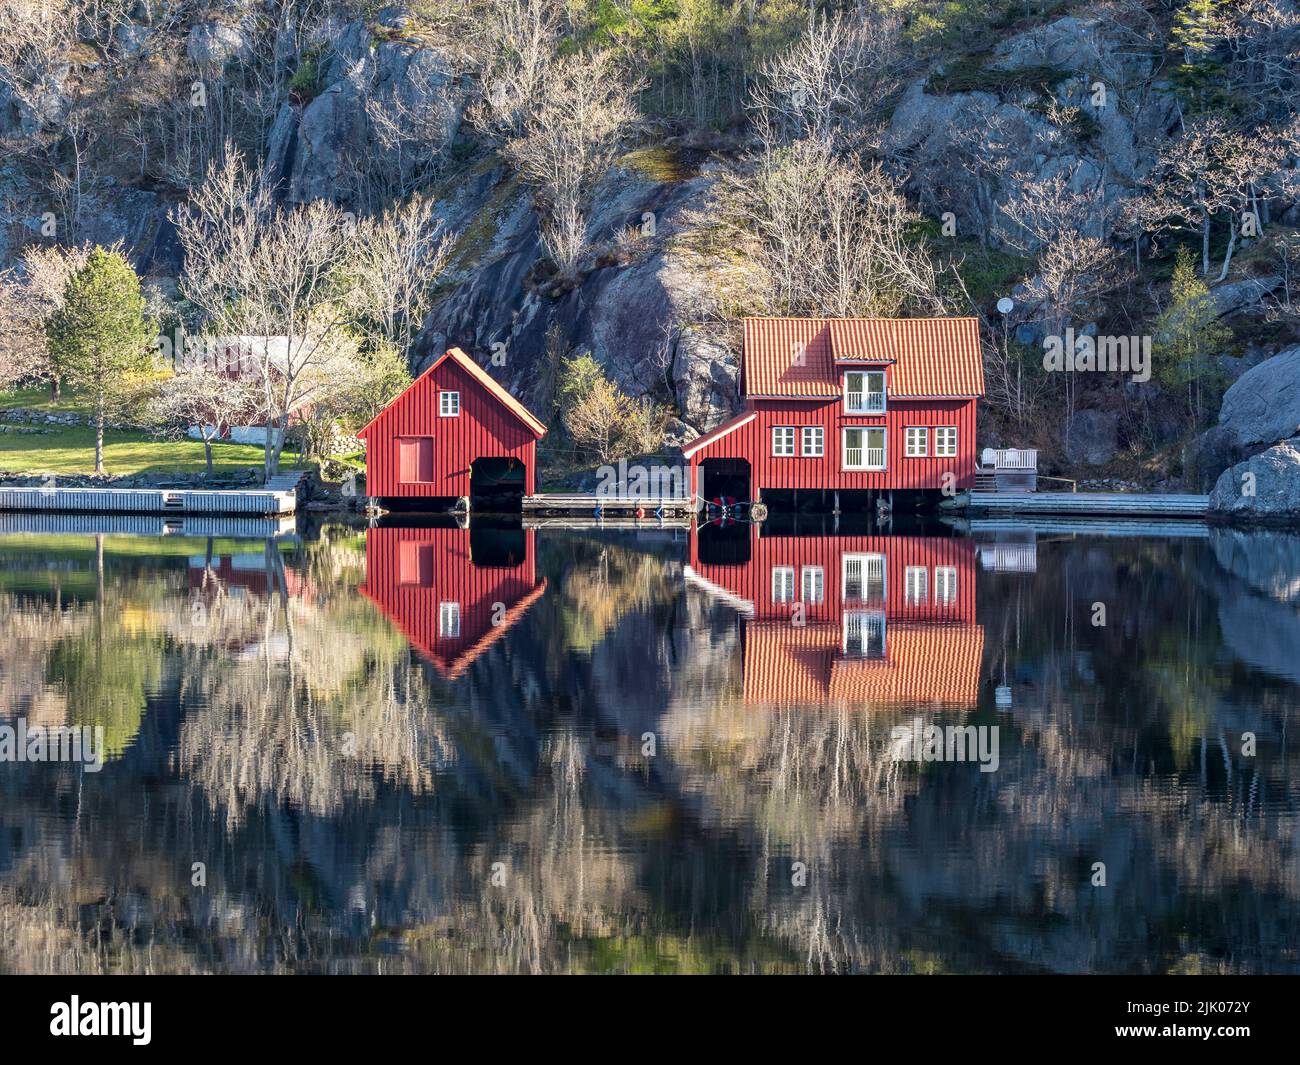 Fjord near Ana Sira at the norwegian southern coast, lonely houses at feet of a rock formation, Norway Stock Photo